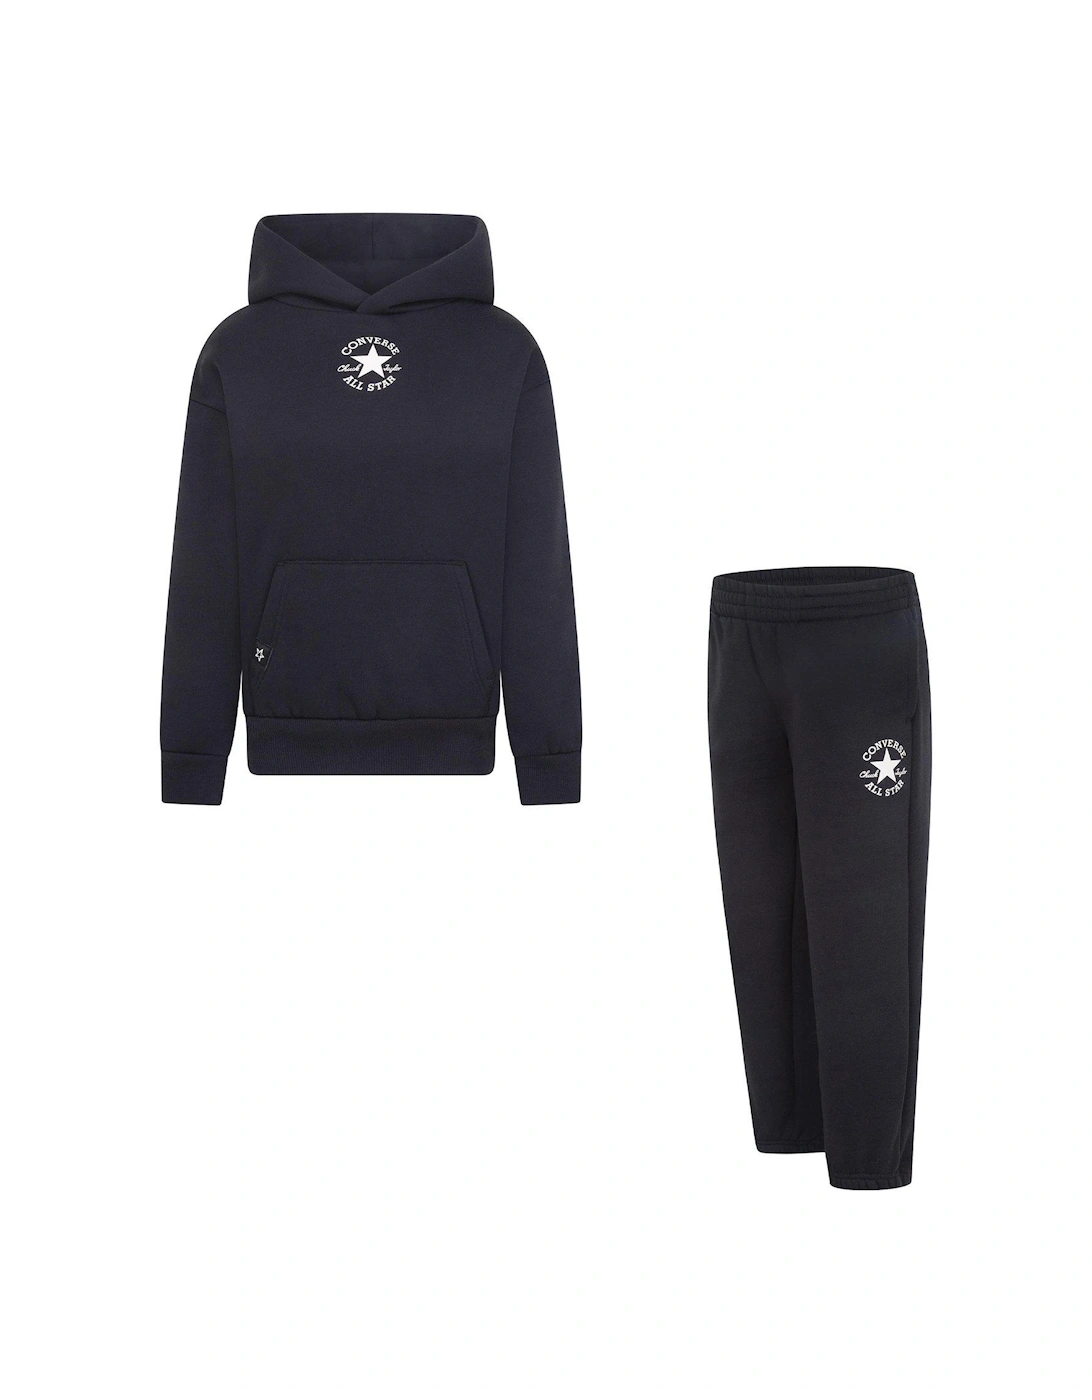 Younger Boys Core Hoody and Pant Set - Black, 5 of 4